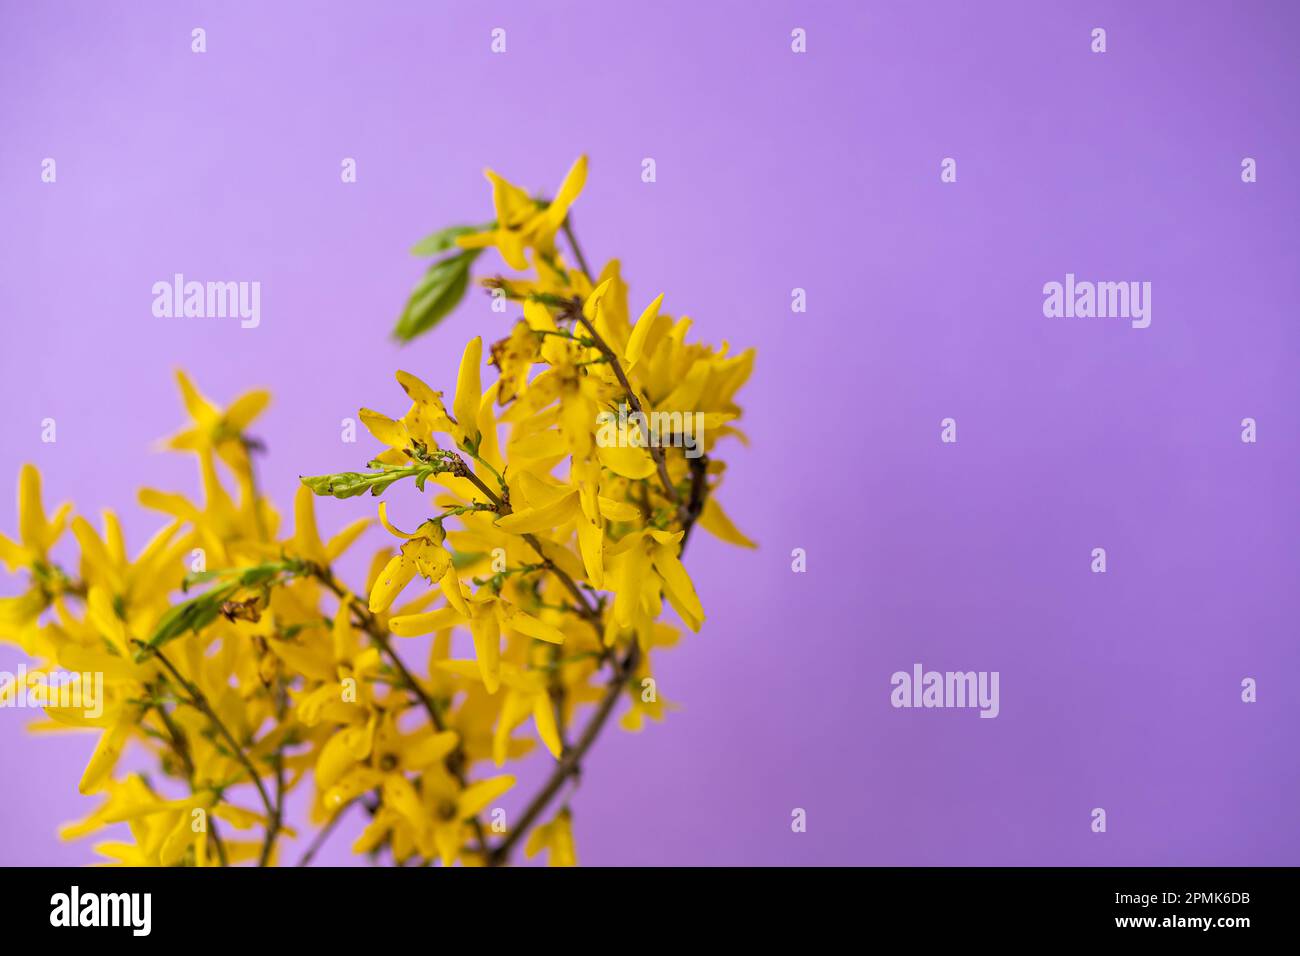 purple and yellow spring flowers on violet paper background. Stock Photo